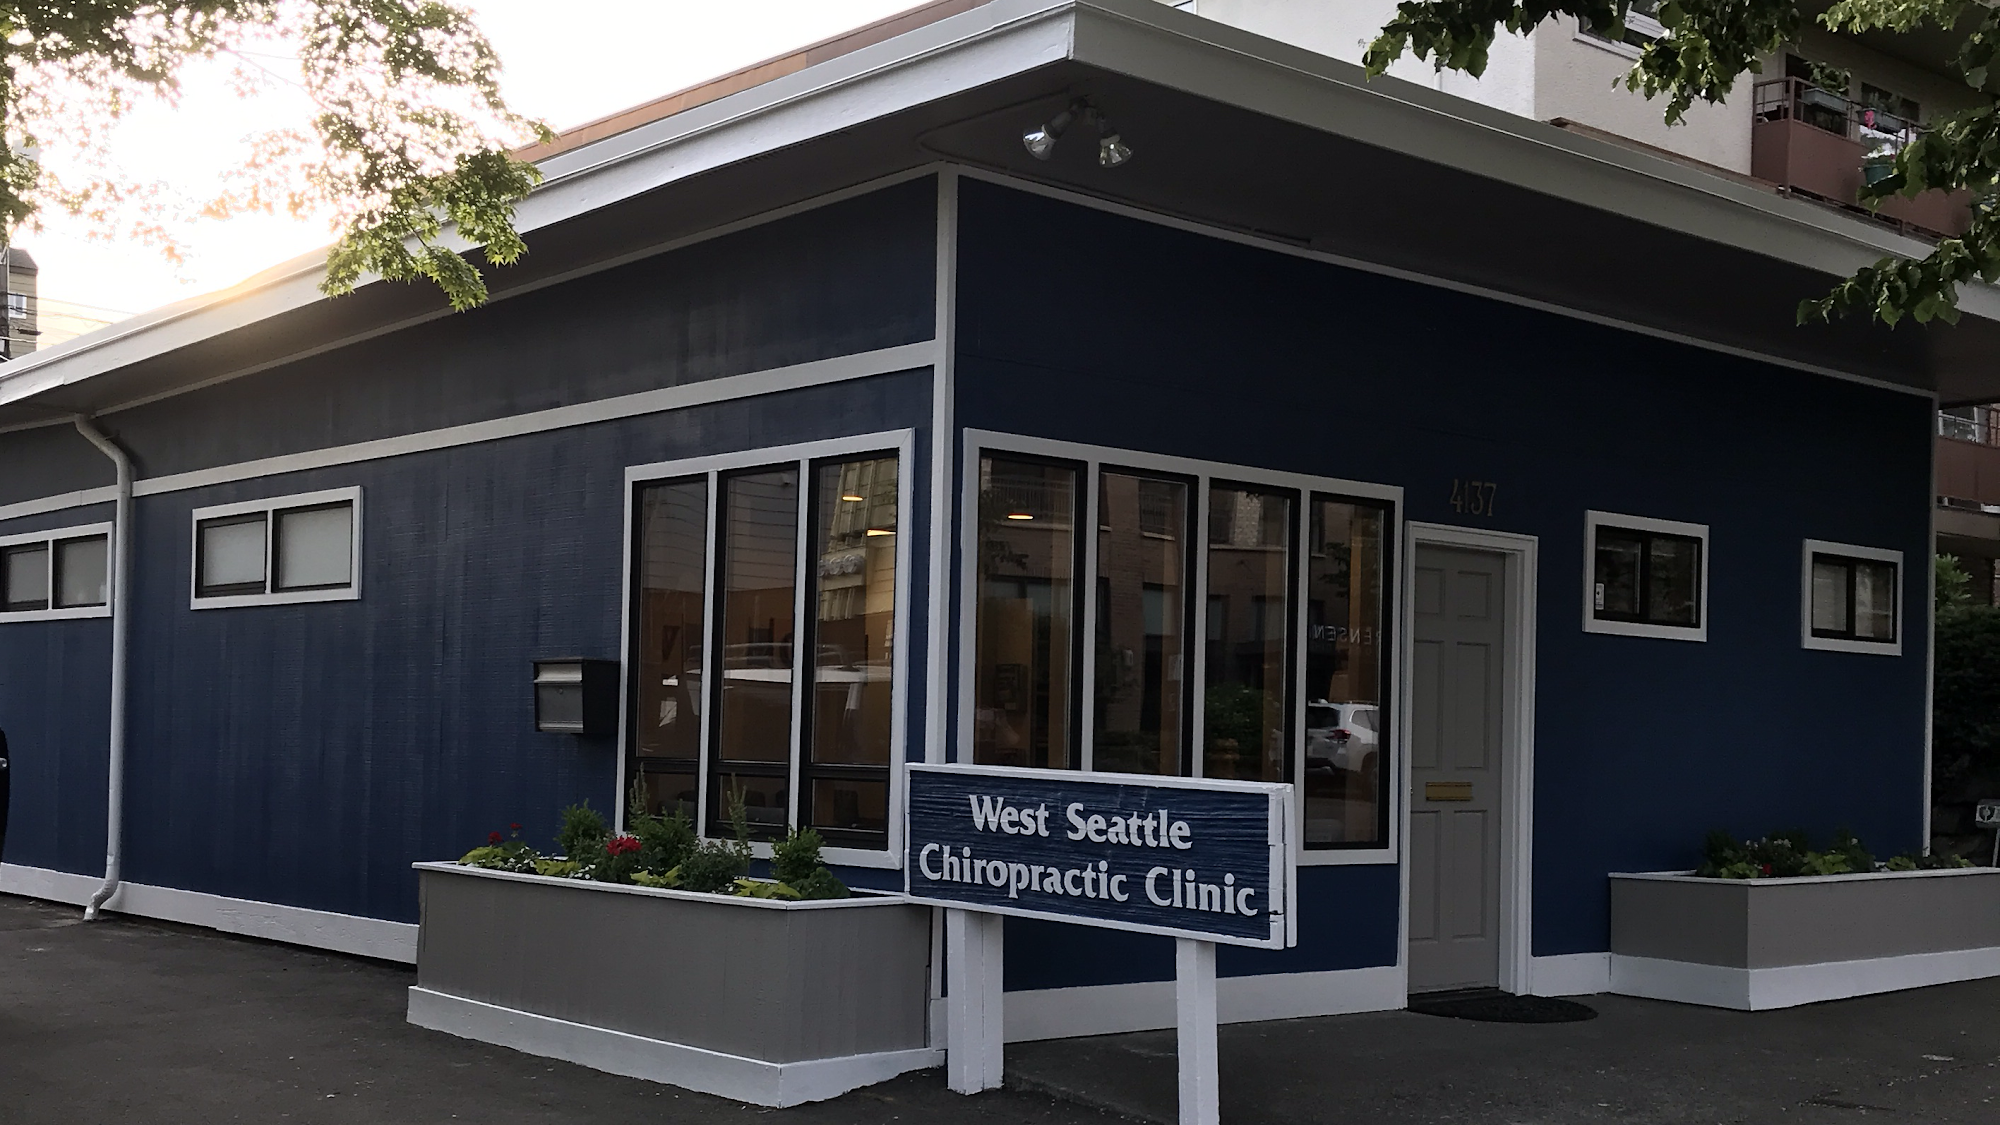 West Seattle Chiropractic Clinic